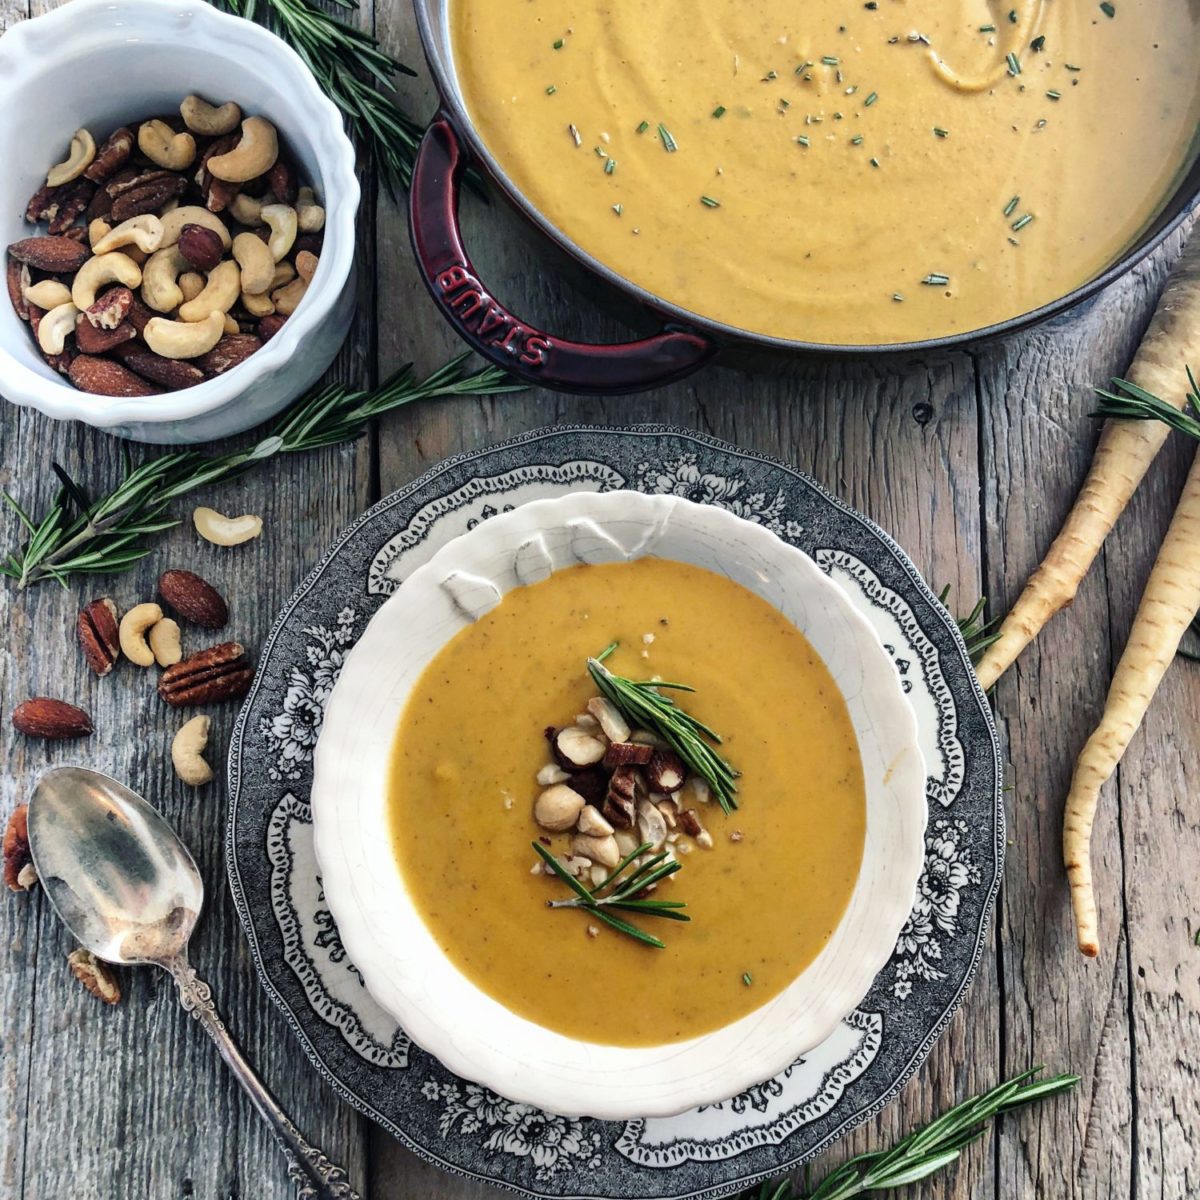 Parsnip, Rosemary and Mixed Nuts Soup